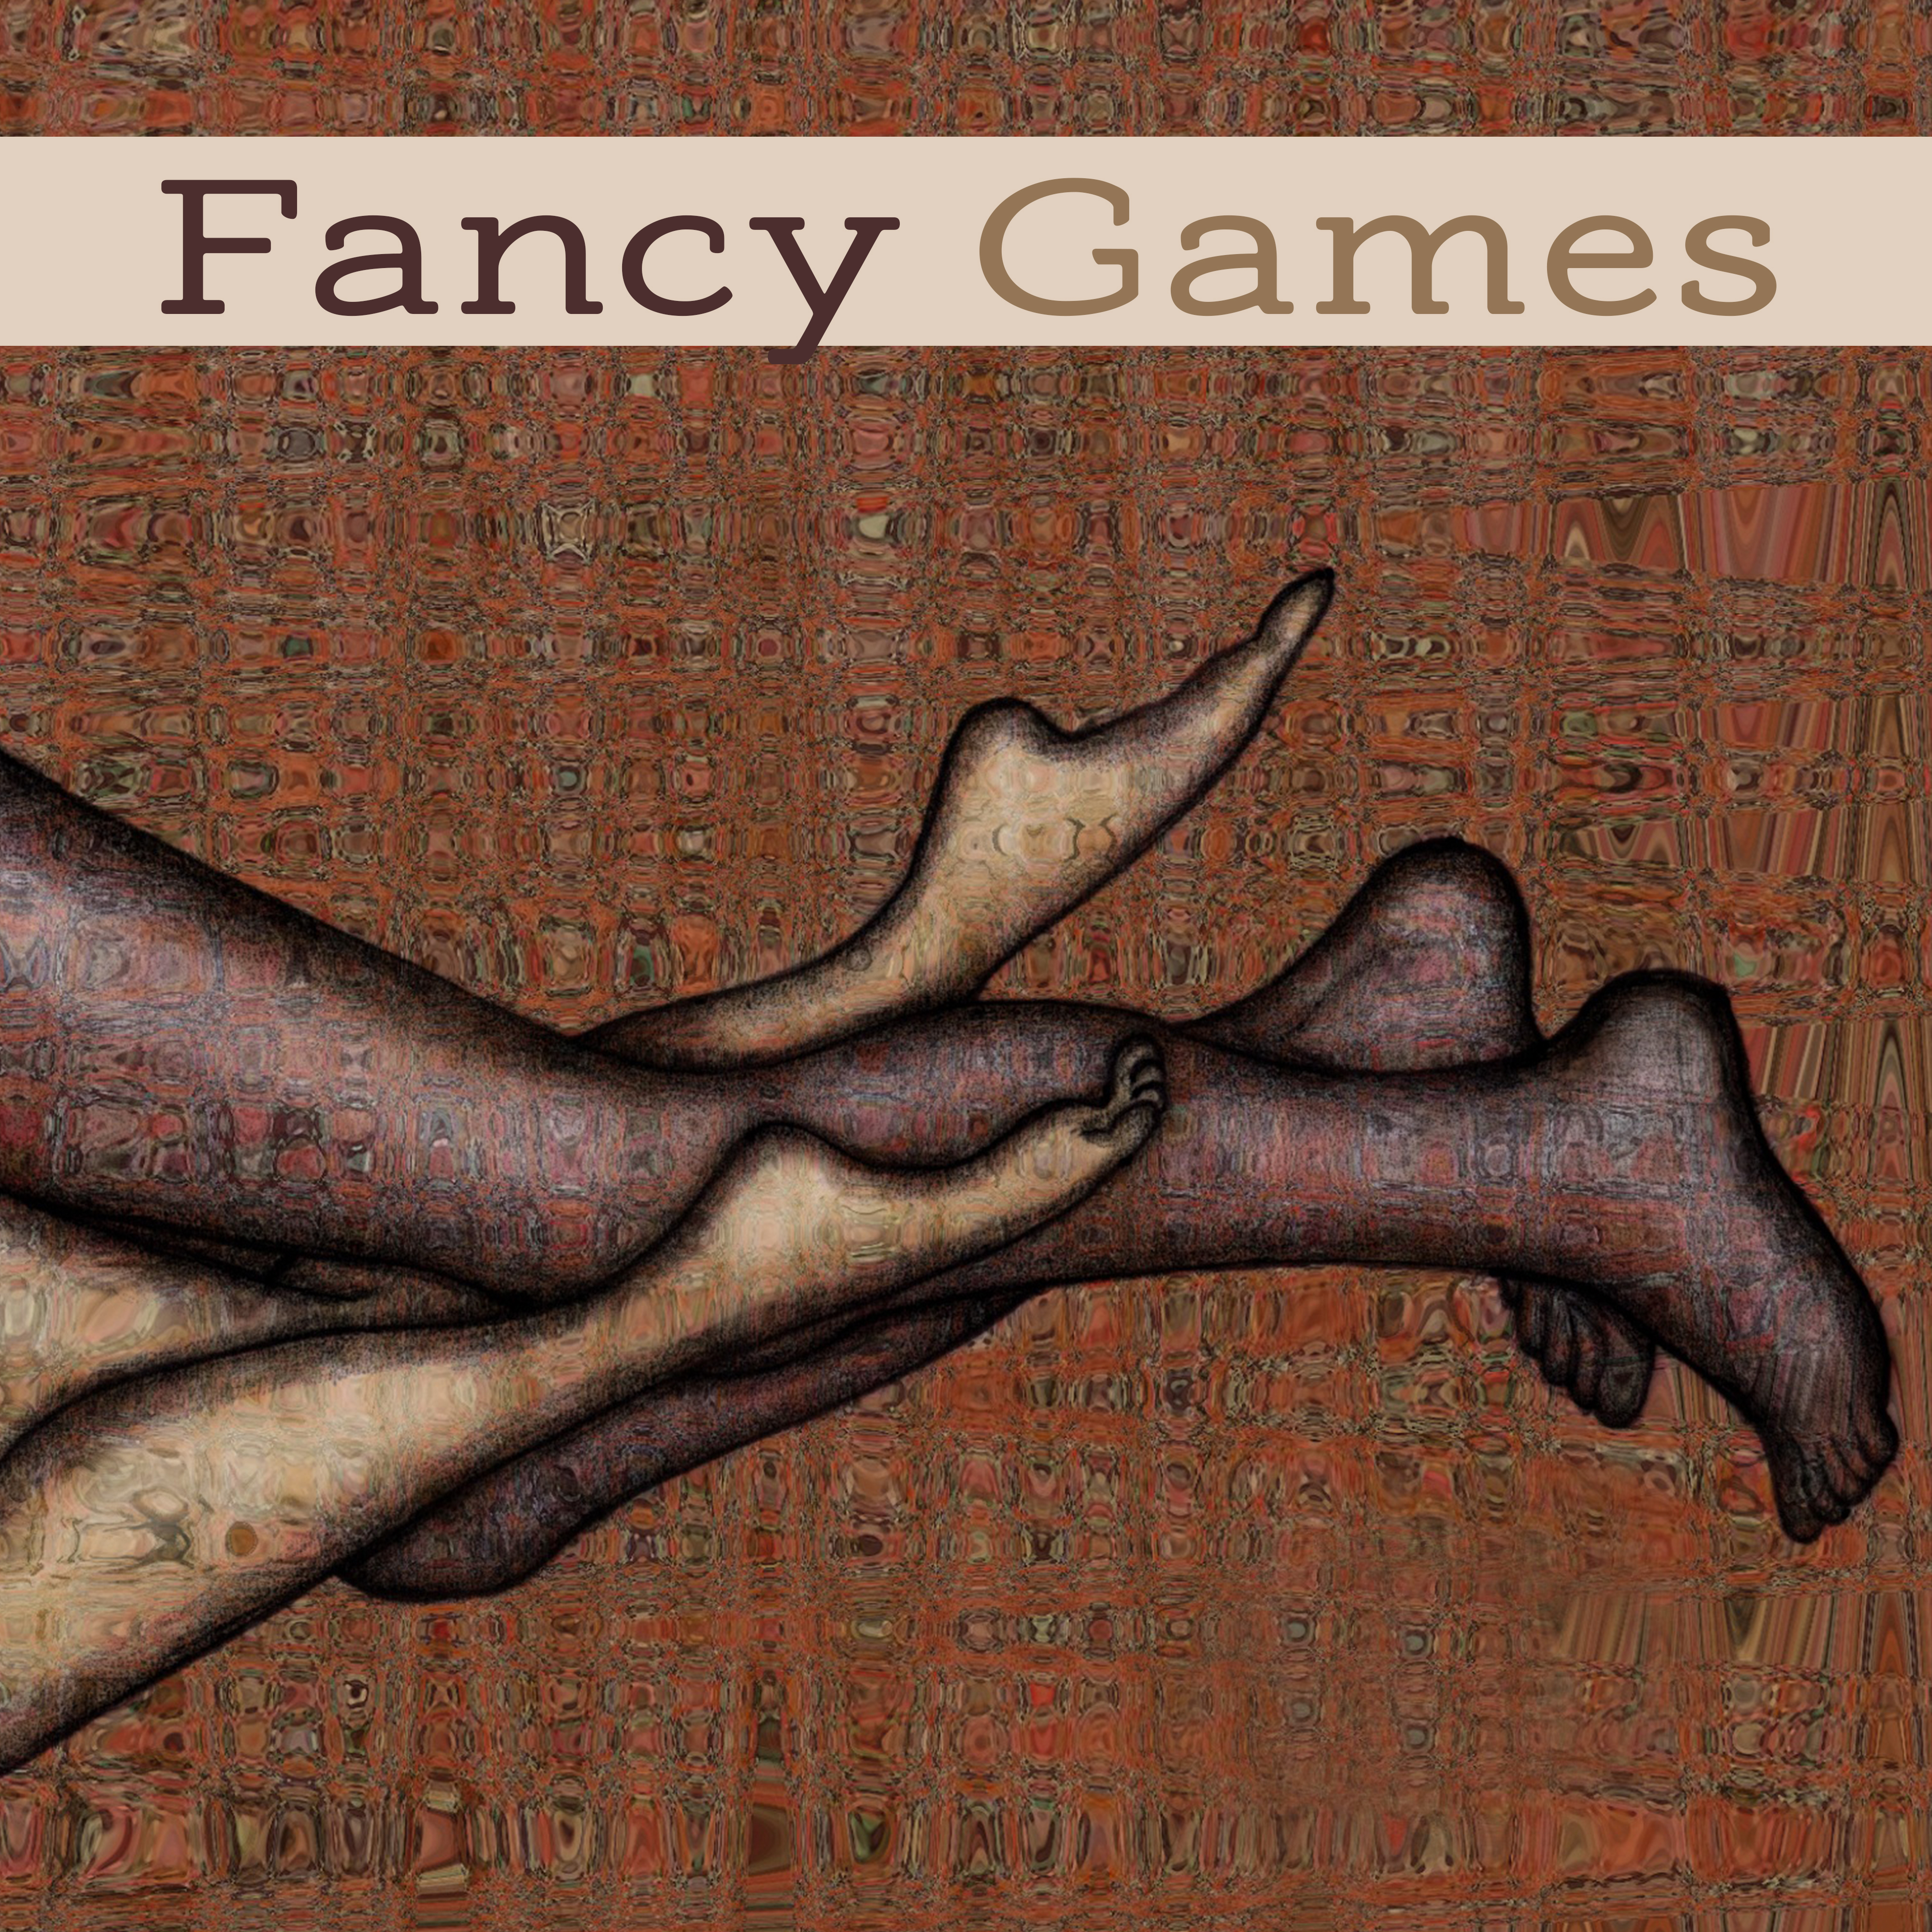 Fancy Games – Sensual Chill Out Music, Erotic Massage, **** Dance, Relaxation for Two, Tantric ***, Making Love, **** Vibrations